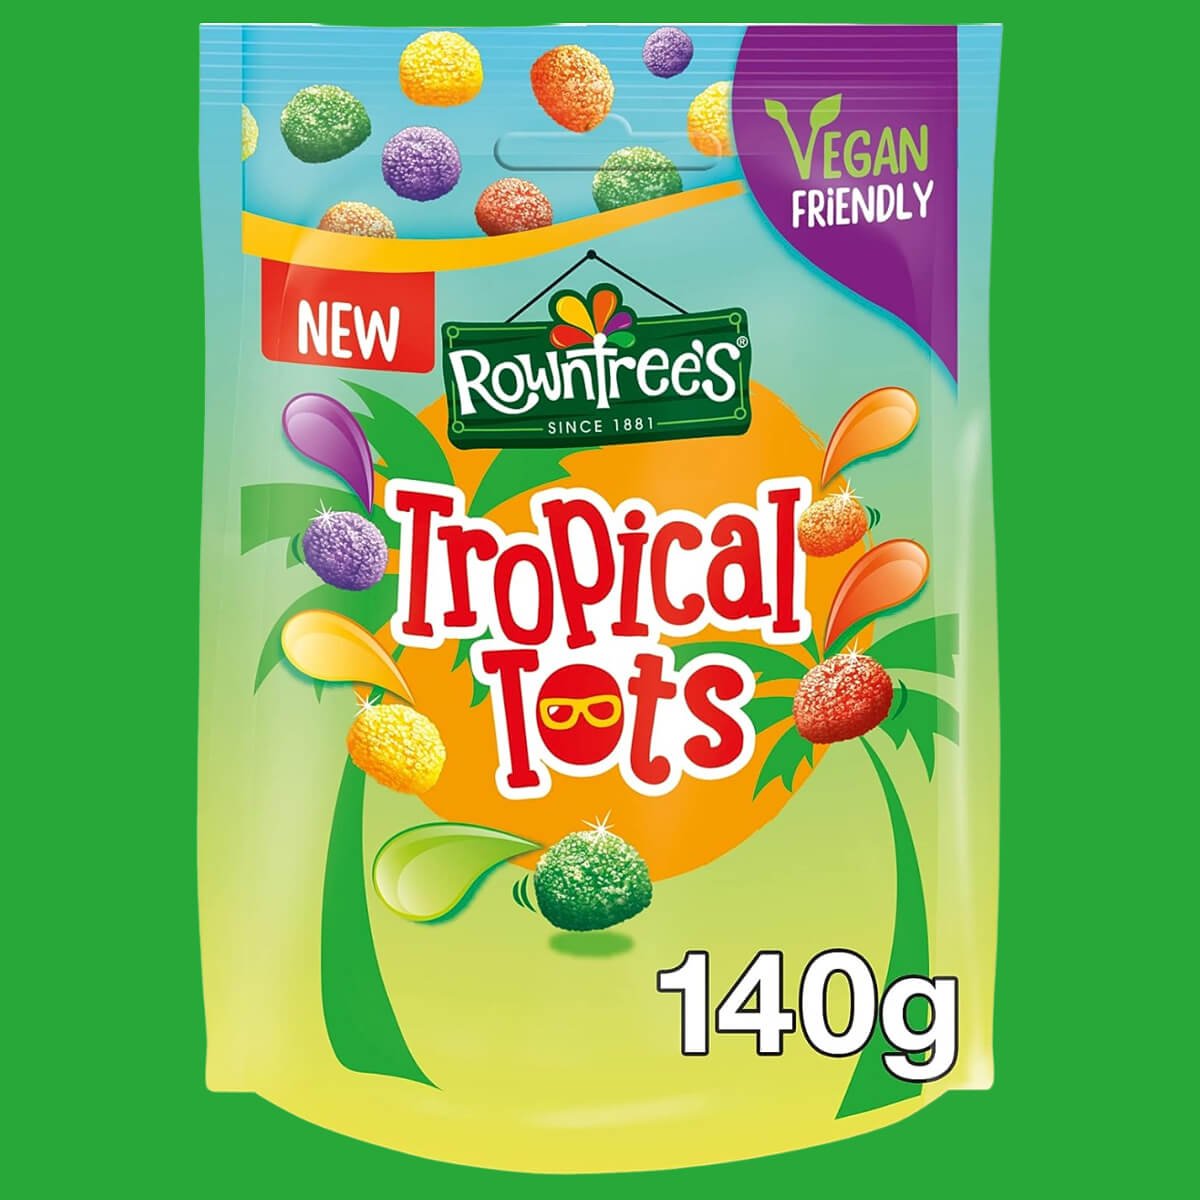 Pouch of Rowntree's Tropical Tots (2023) with green background.